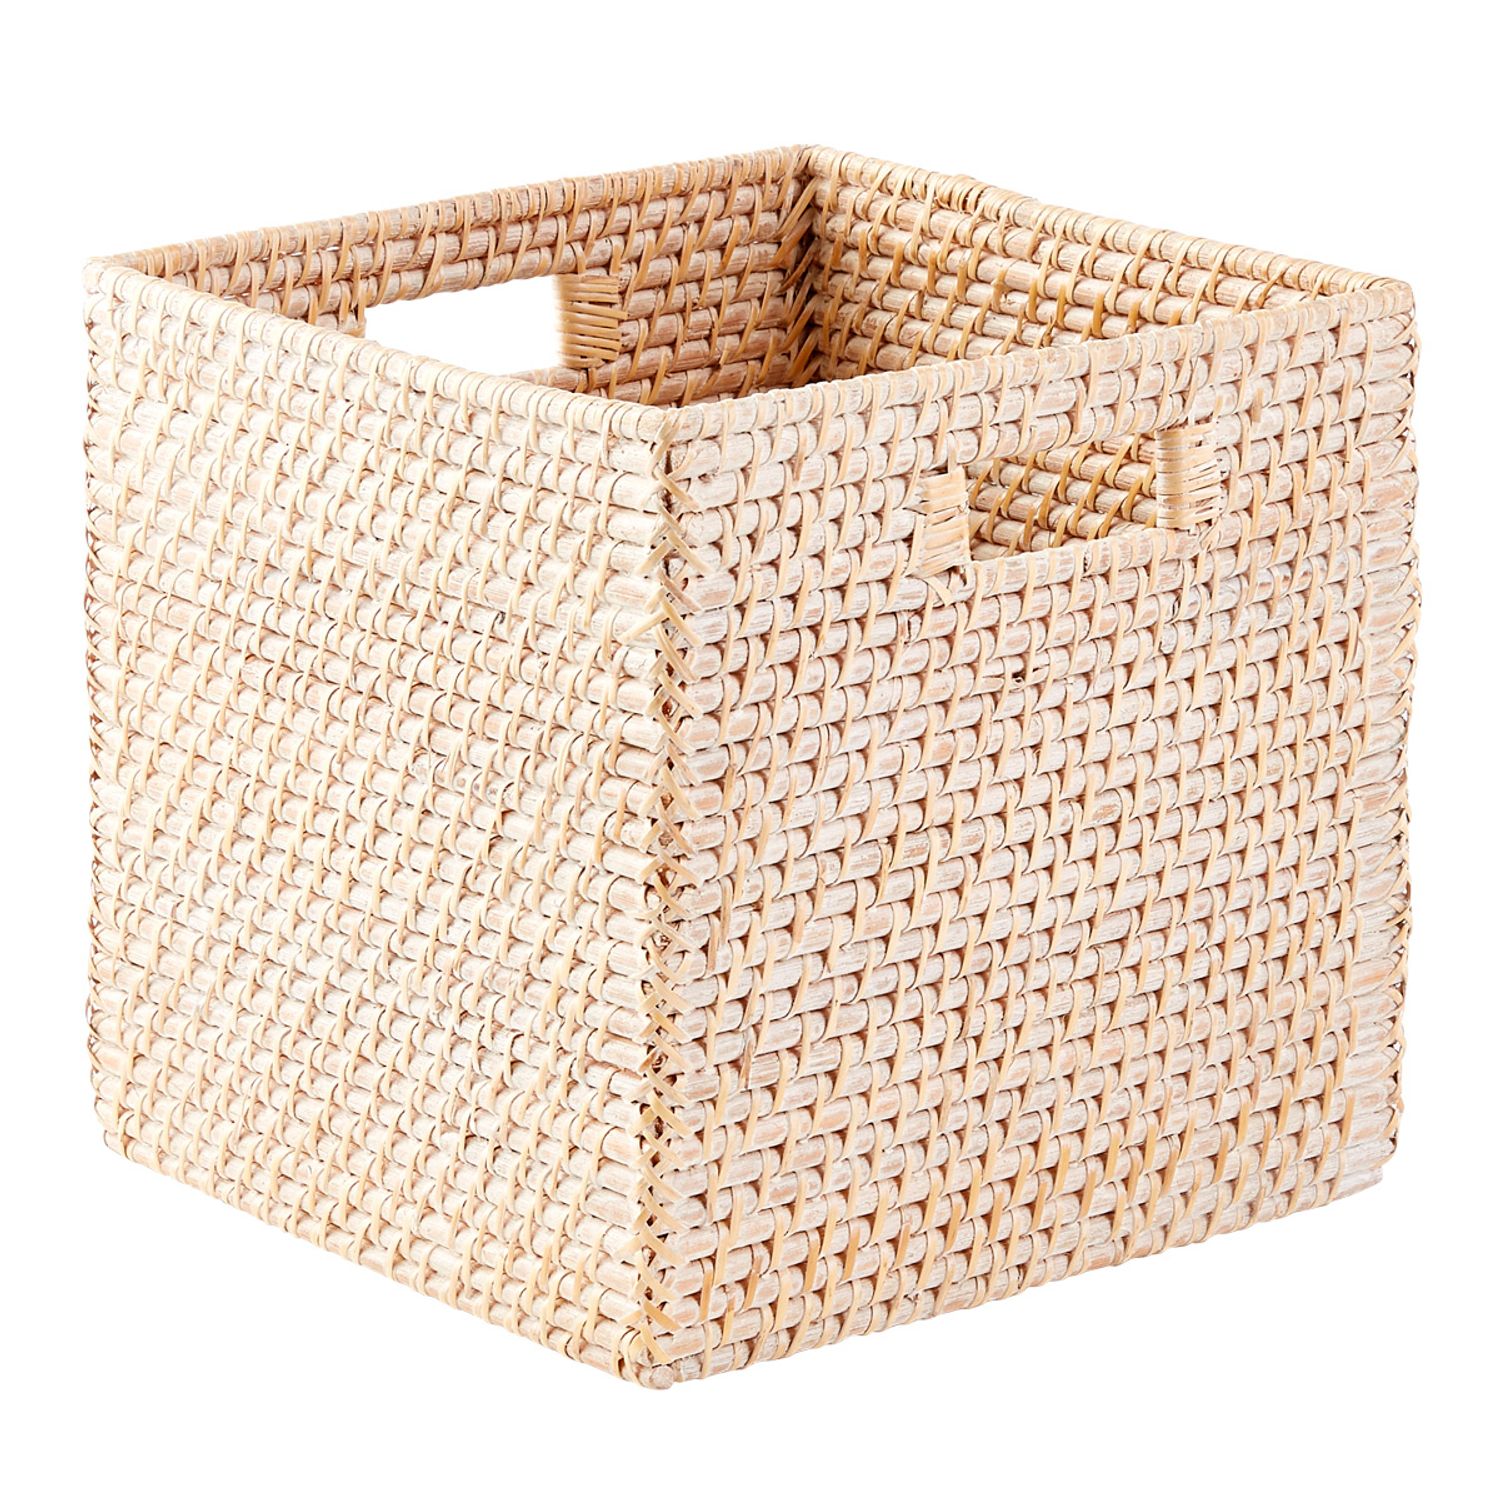 Shop Whitewash Rattan Storage Cubes from The Container Store on Openhaus